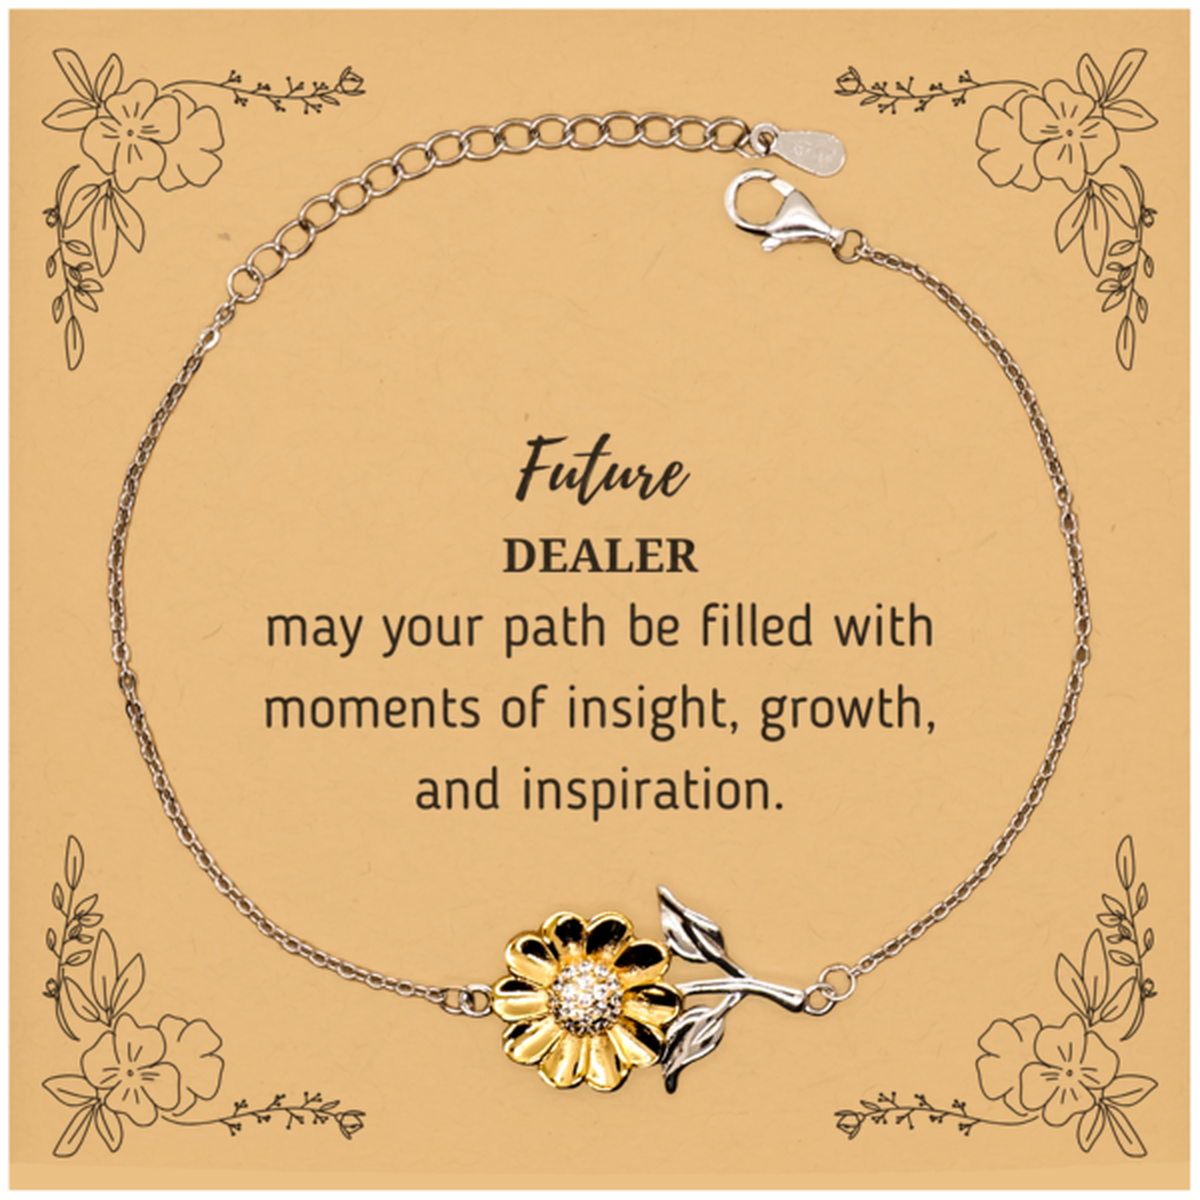 Future Dealer Gifts, May your path be filled with moments of insight, Graduation Gifts for New Dealer, Christmas Unique Sunflower Bracelet For Men, Women, Friends